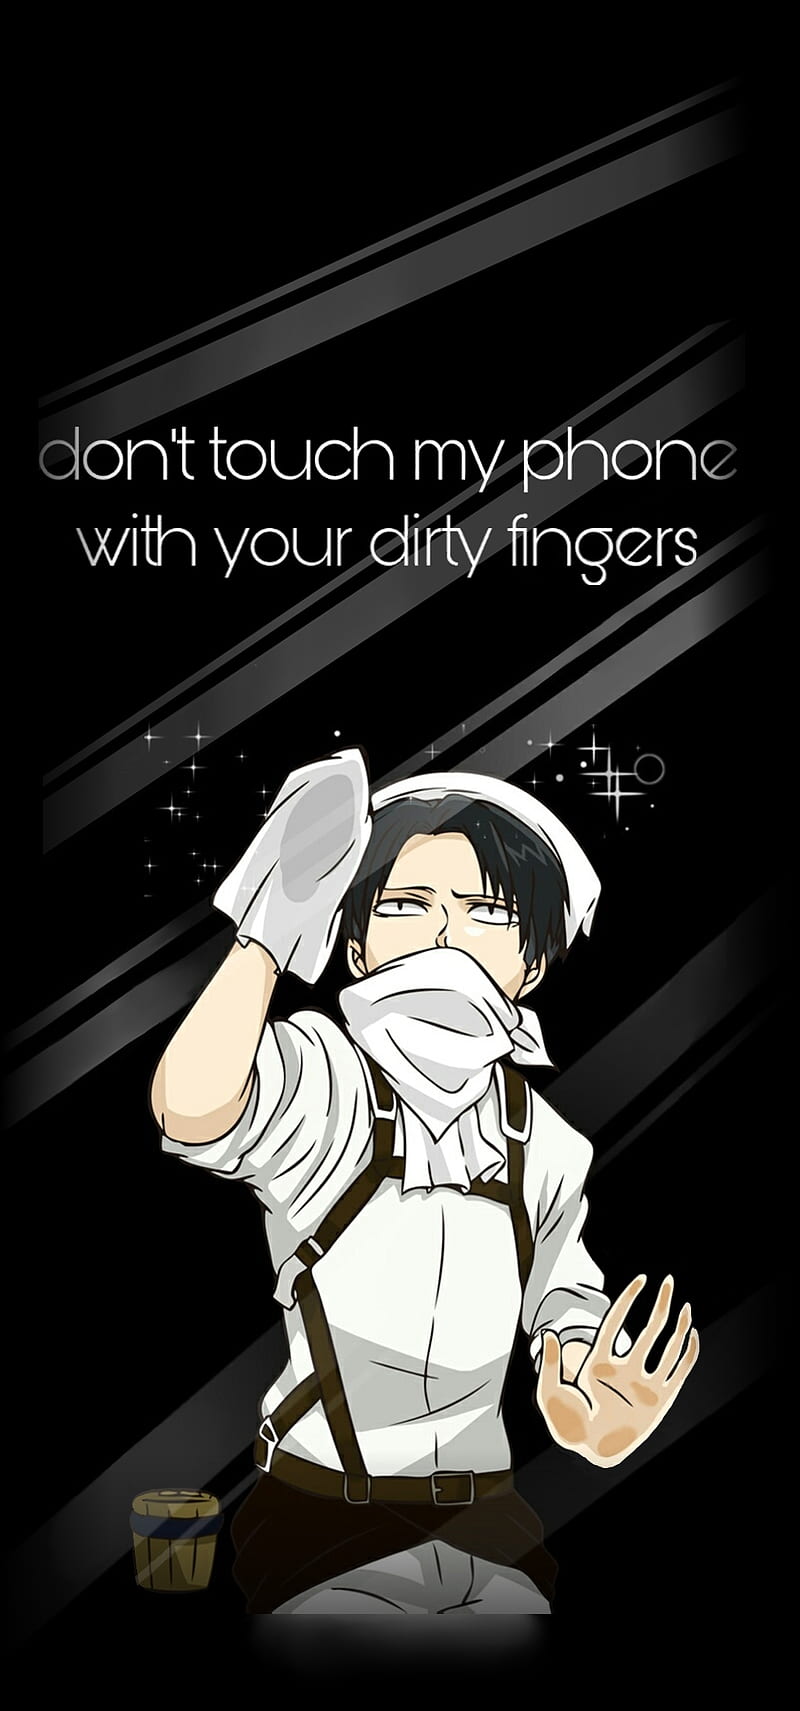 Levi cleaning, ackerman, android, anime, aot, blade, iphone, levi ackerman, phone, sword, HD phone wallpaper